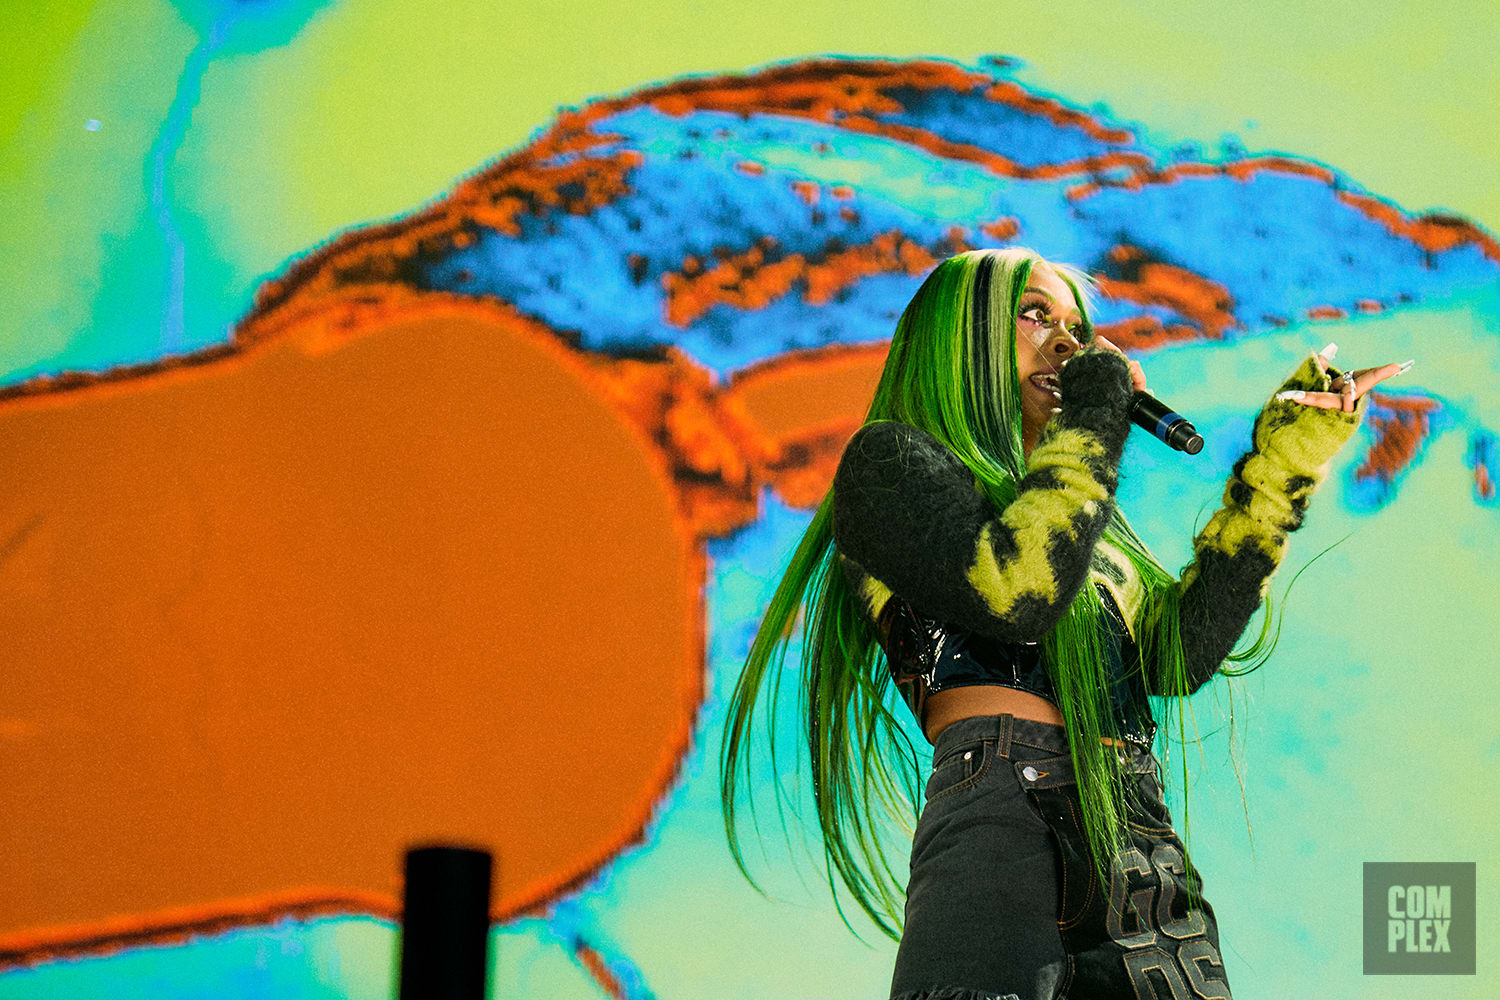 Rico Nasty at Rolling Loud New York 2021